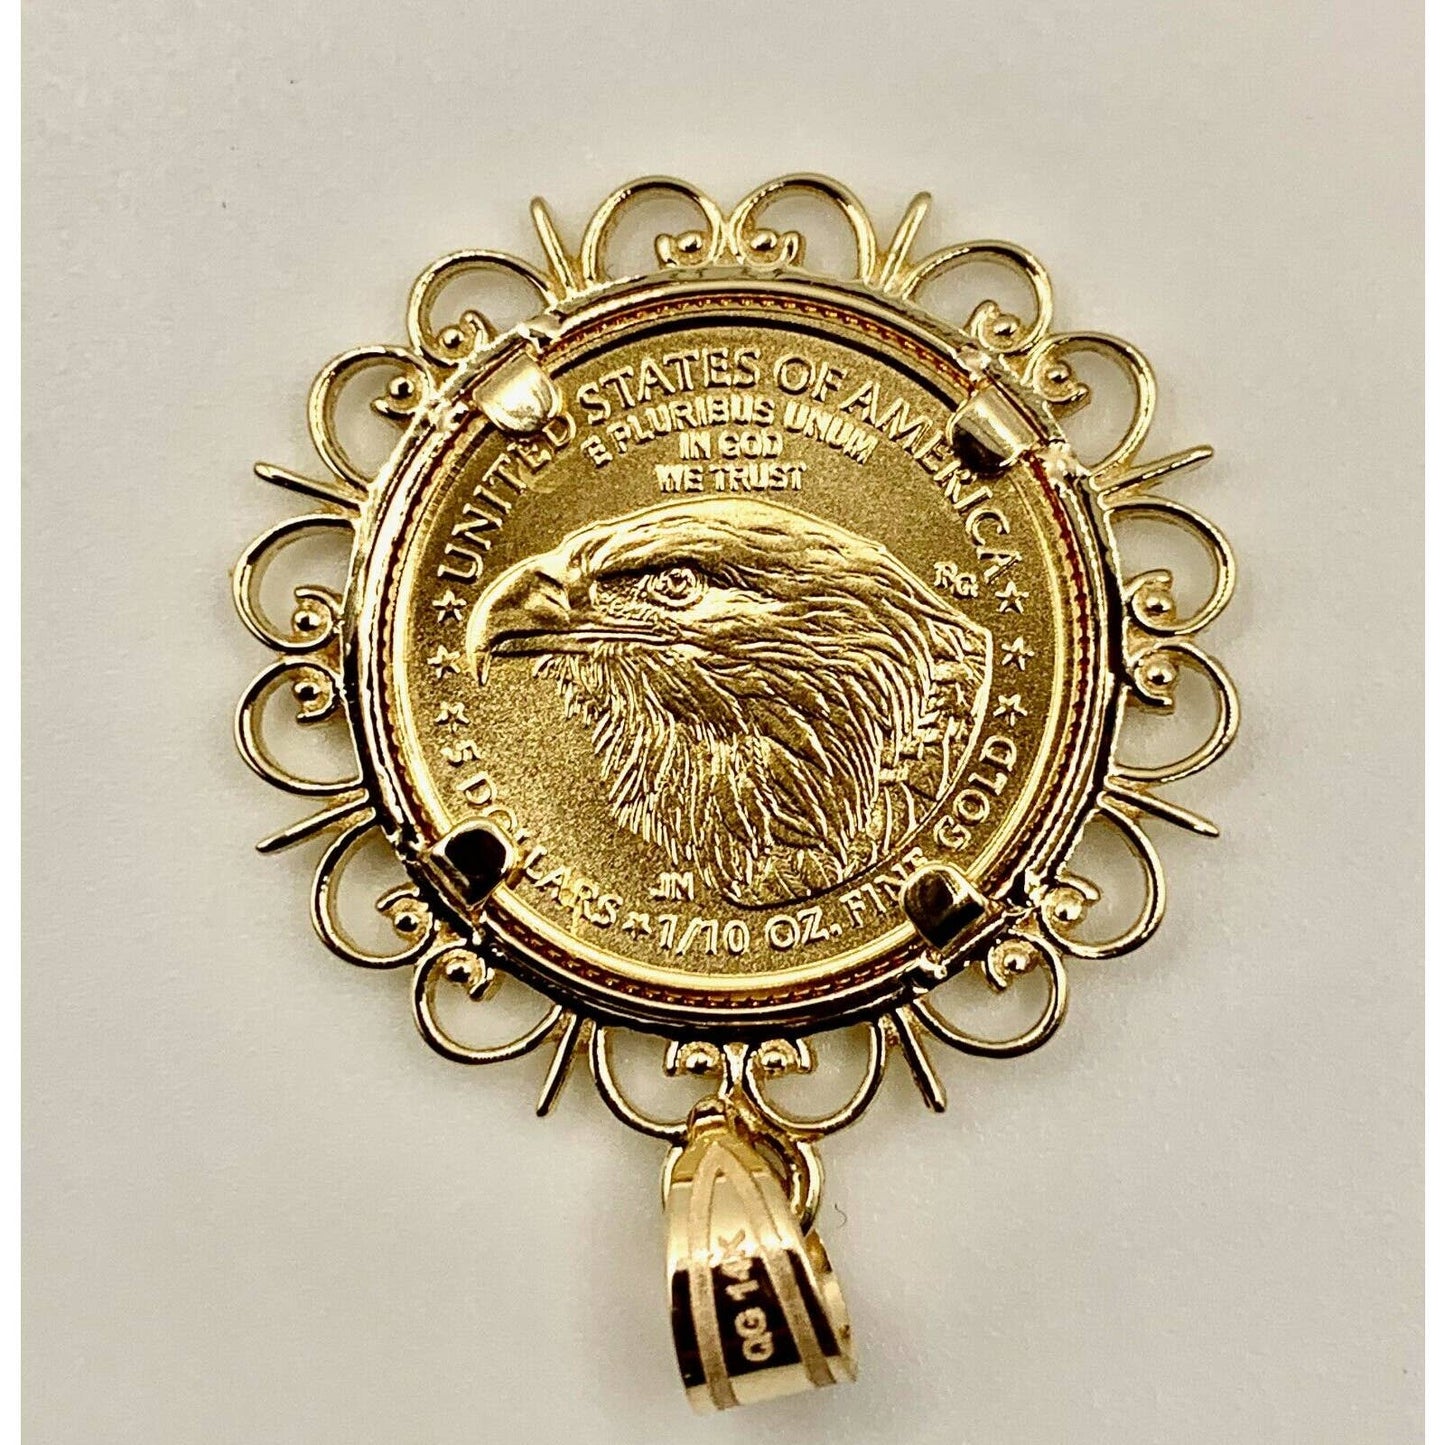 22k Gold 1/10 oz. Lady Liberty Coin mounted in 14k Gold Filigree Design Bezel, by WideBand